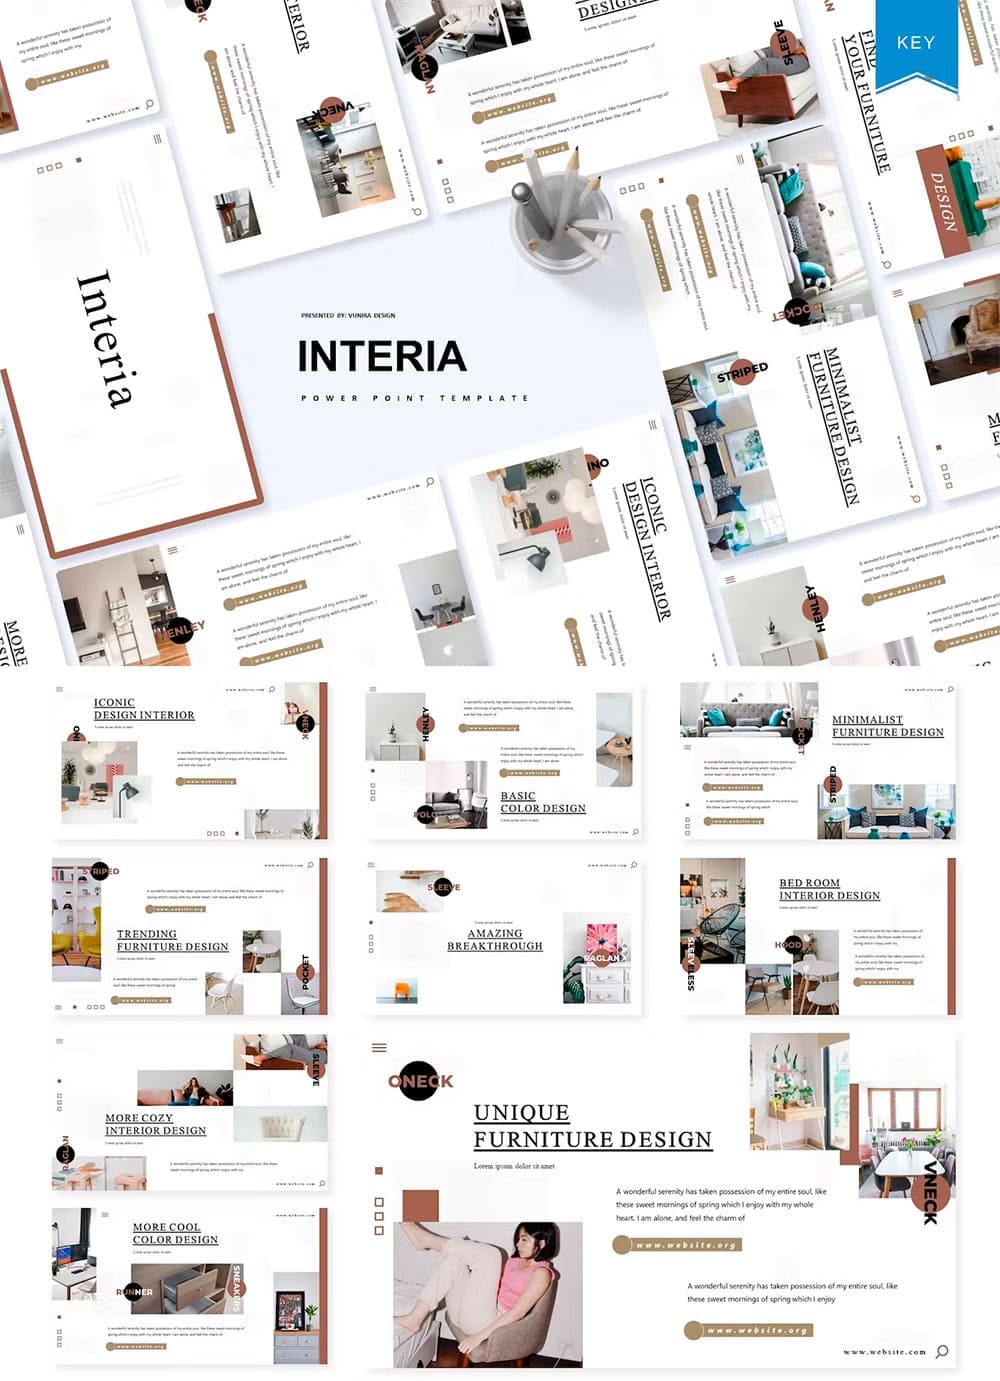 Interia keynote template, picture for pinterest.